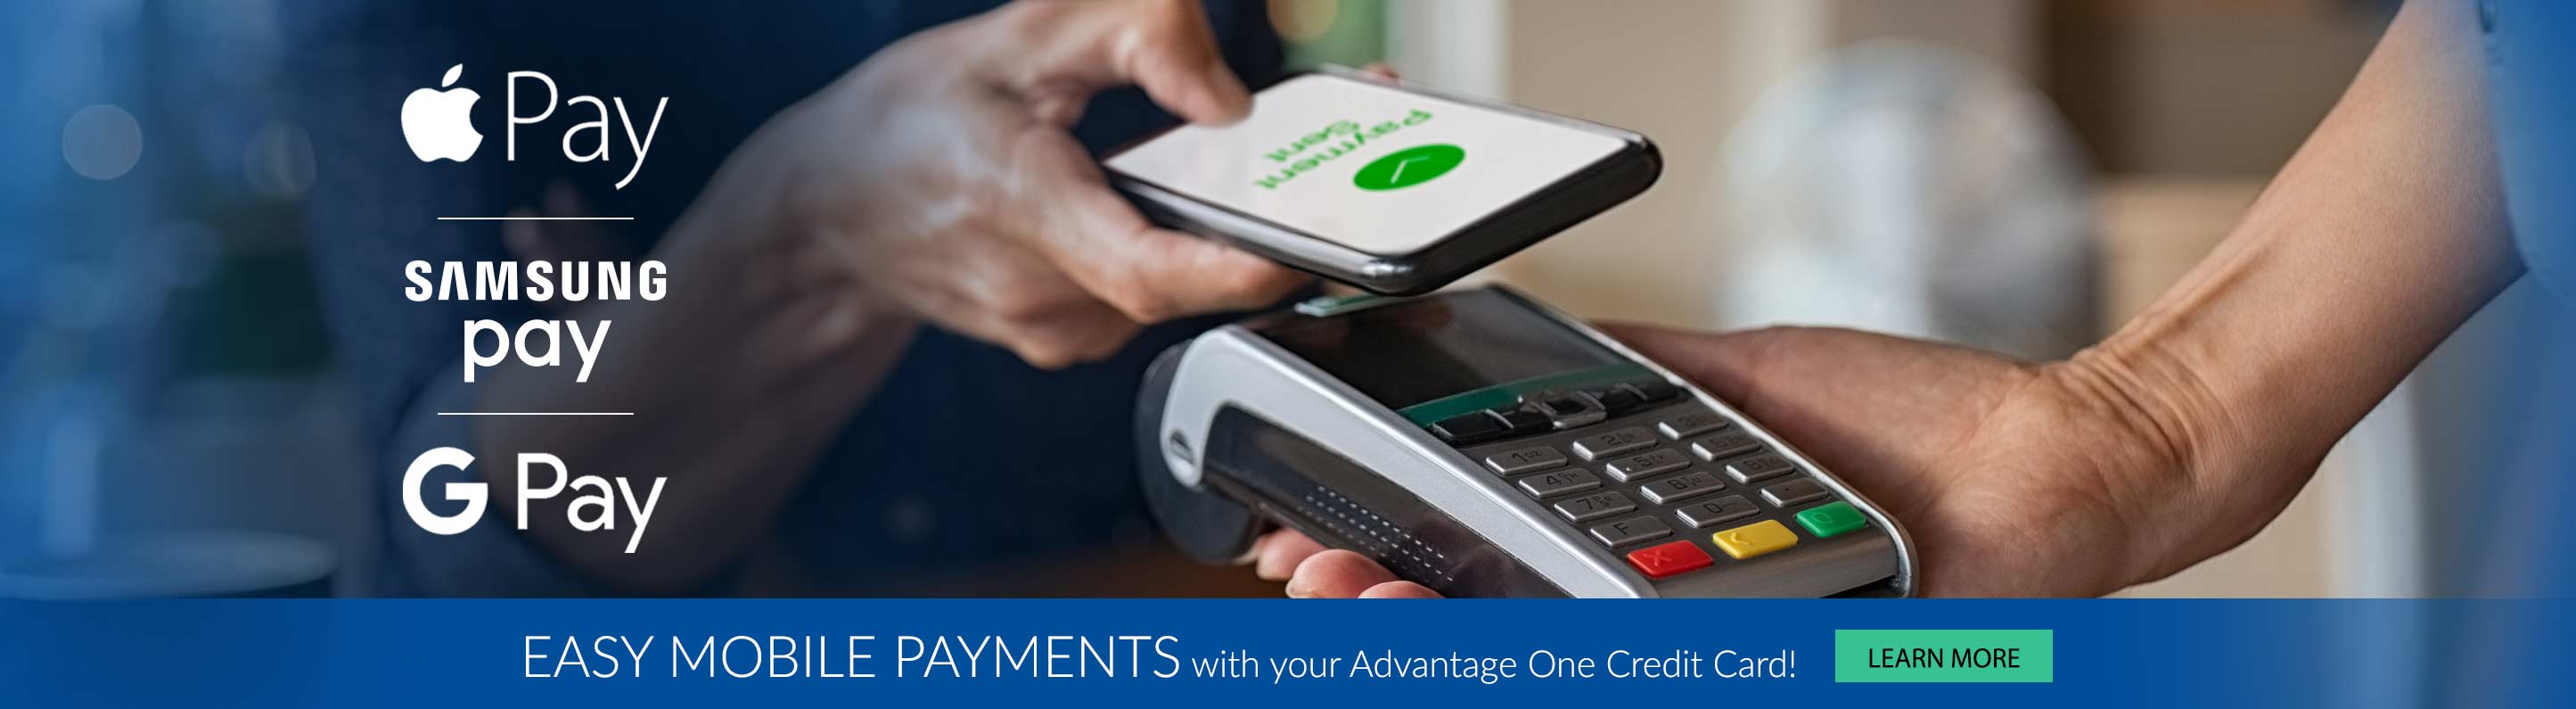 Easy mobile payments with your Advantage One Credit Card! Learn More